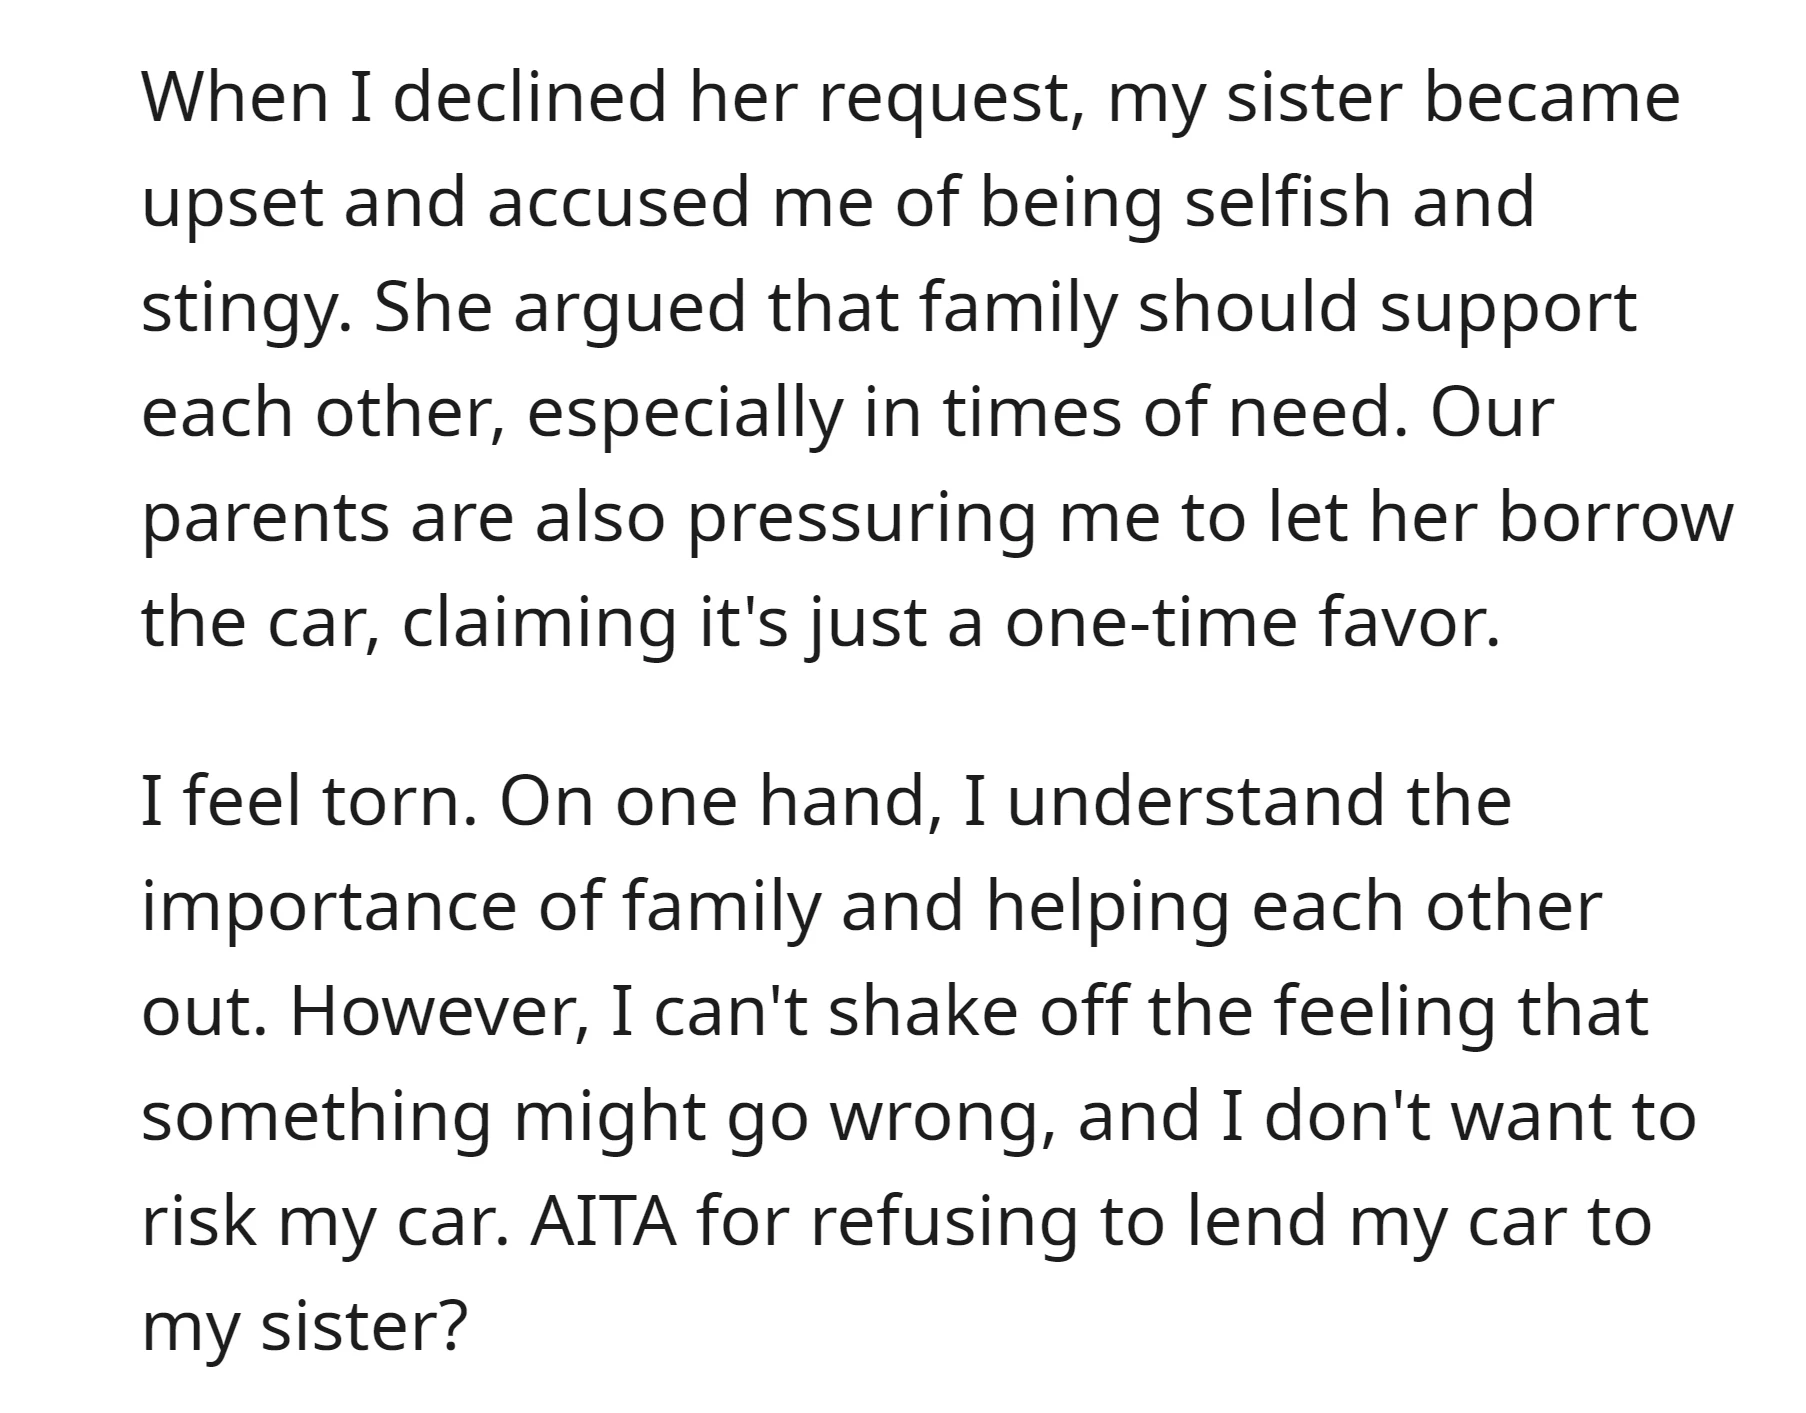 OP faces family pressure and accusations of selfishness for declining her sister's request to borrow her car